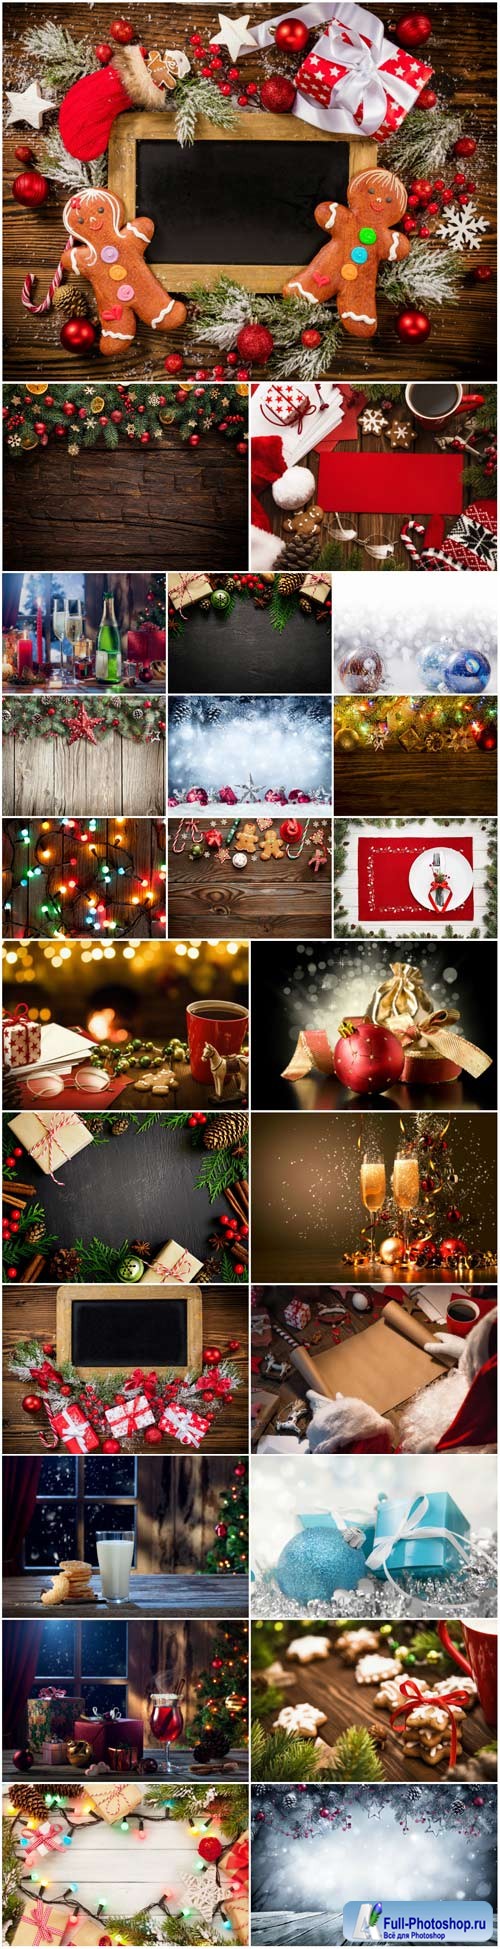 New Year and Christmas stock photos 55